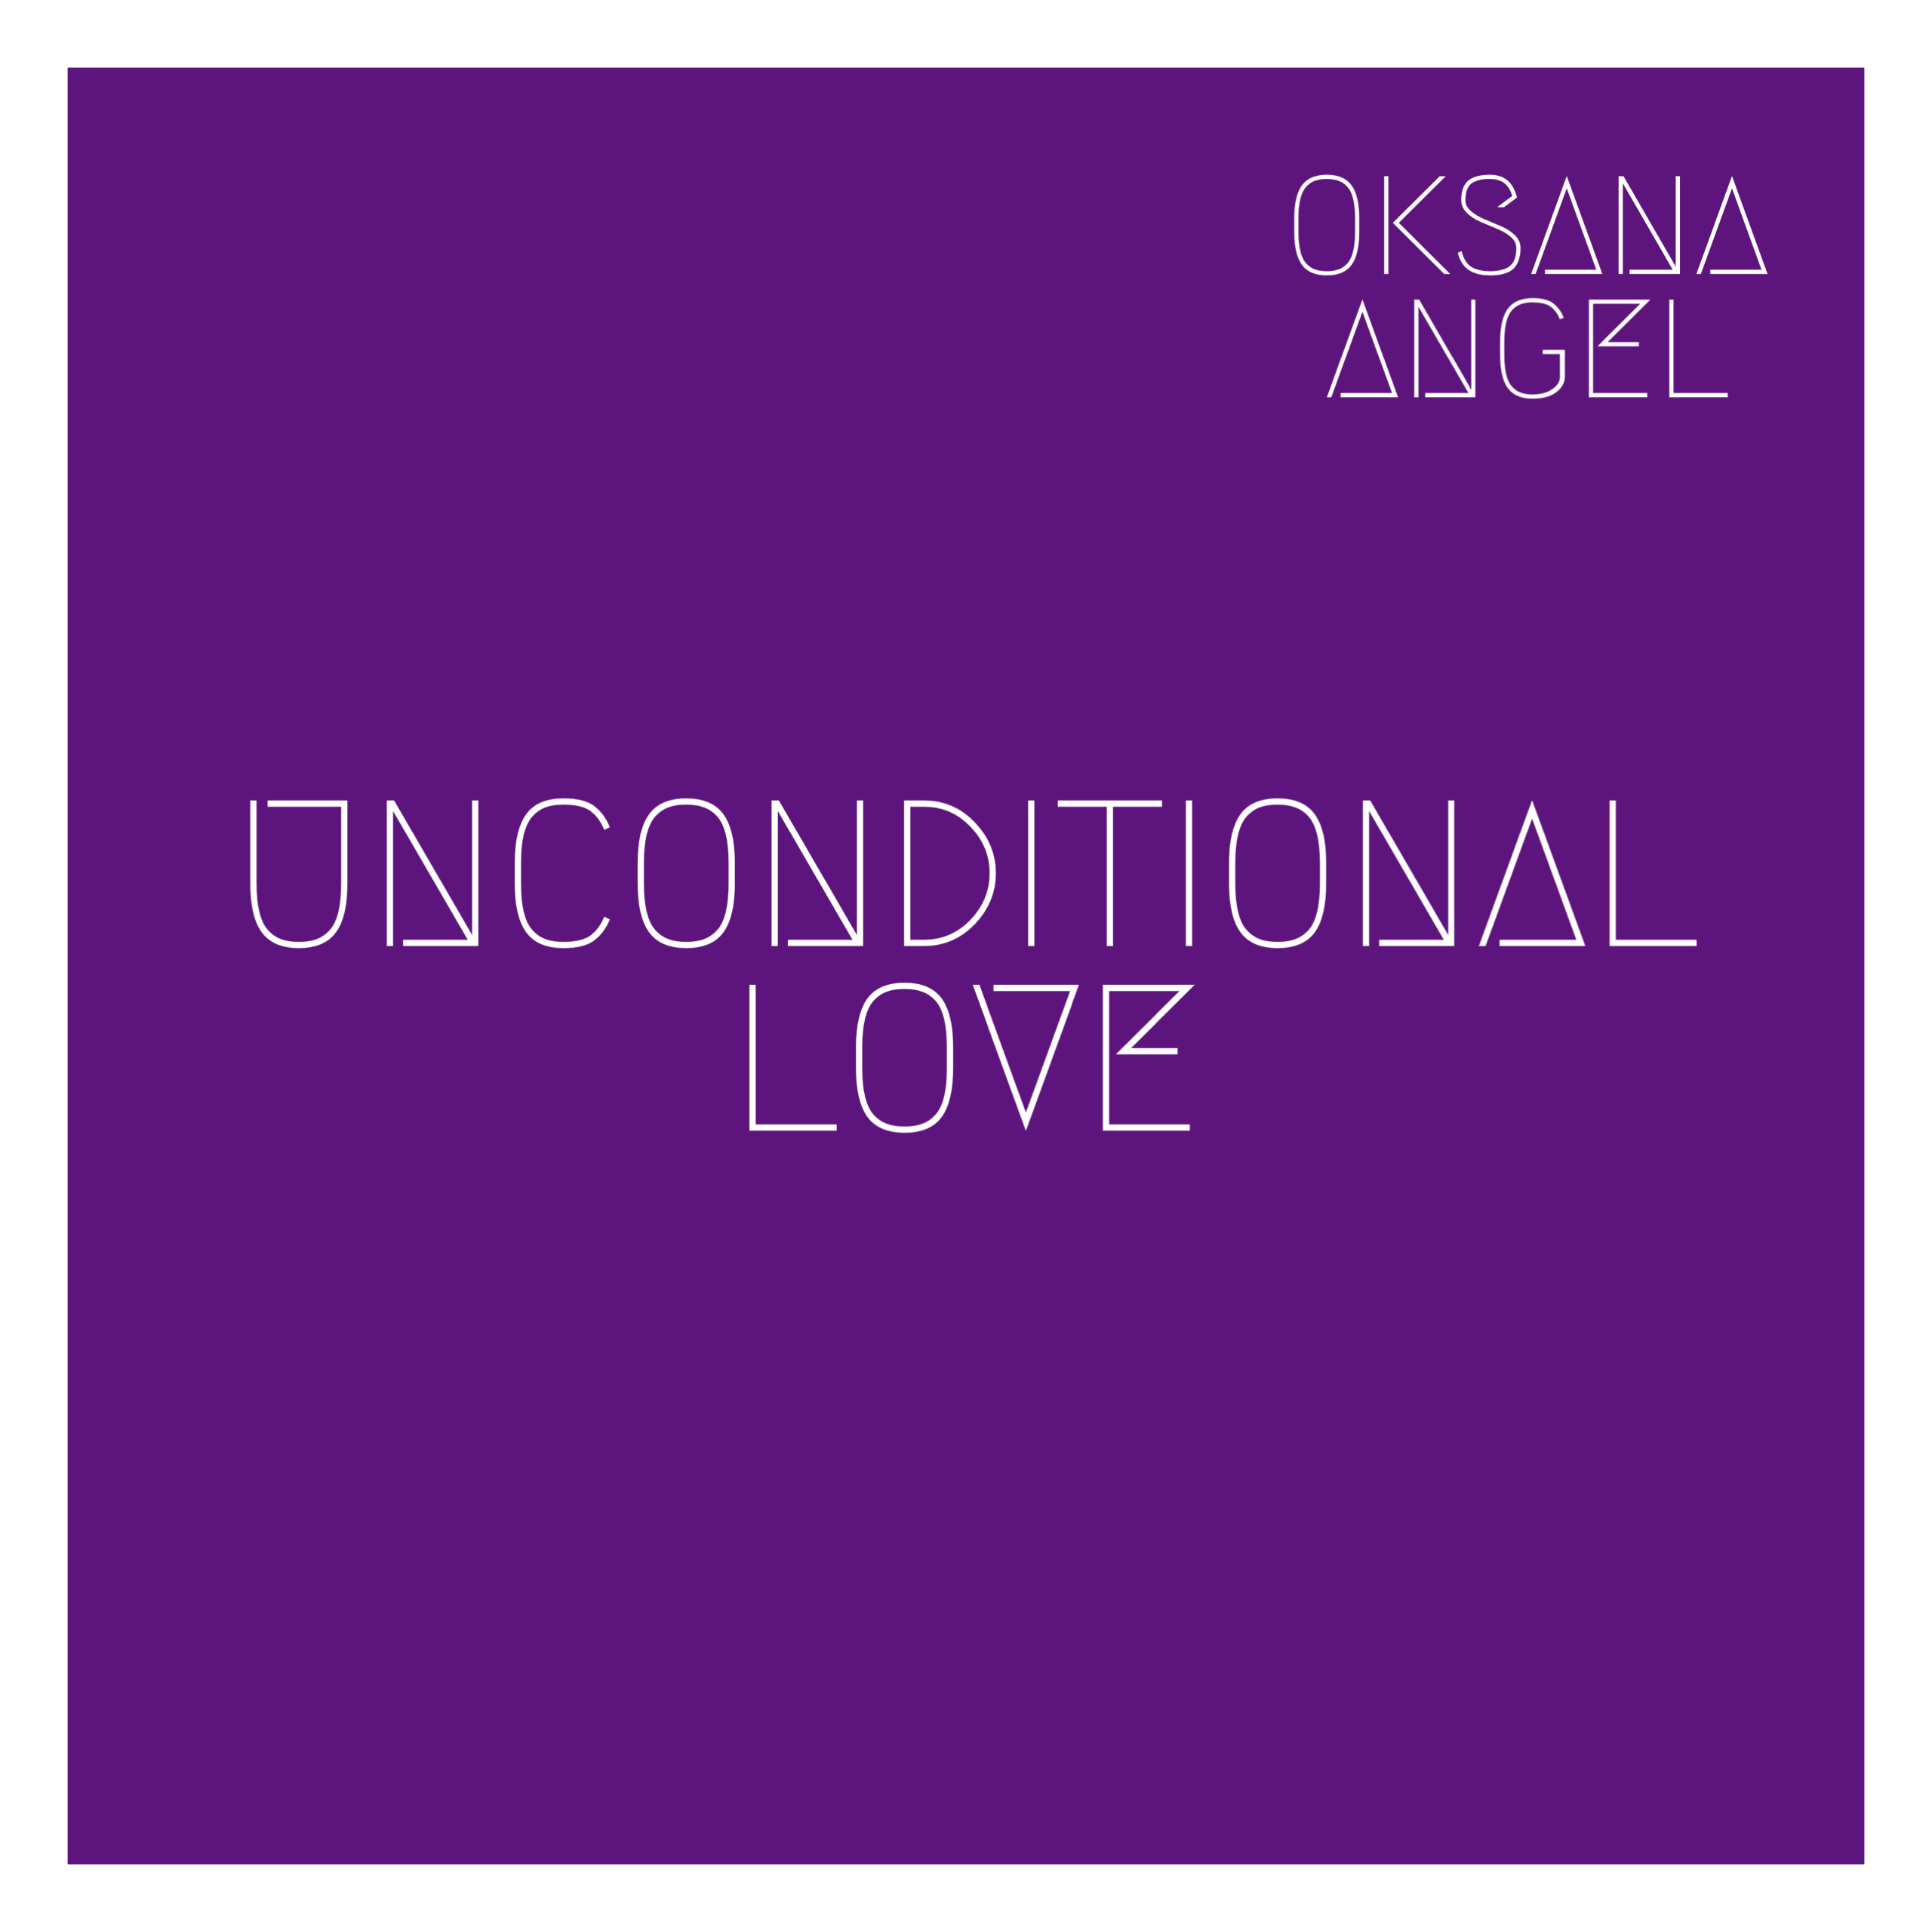 New On The London Digital Playlist: ‘Oksana Angel’ releases ‘Unconditional Love’ radiating joy and happiness to her fans through ‘The Kingdom of Angels’.